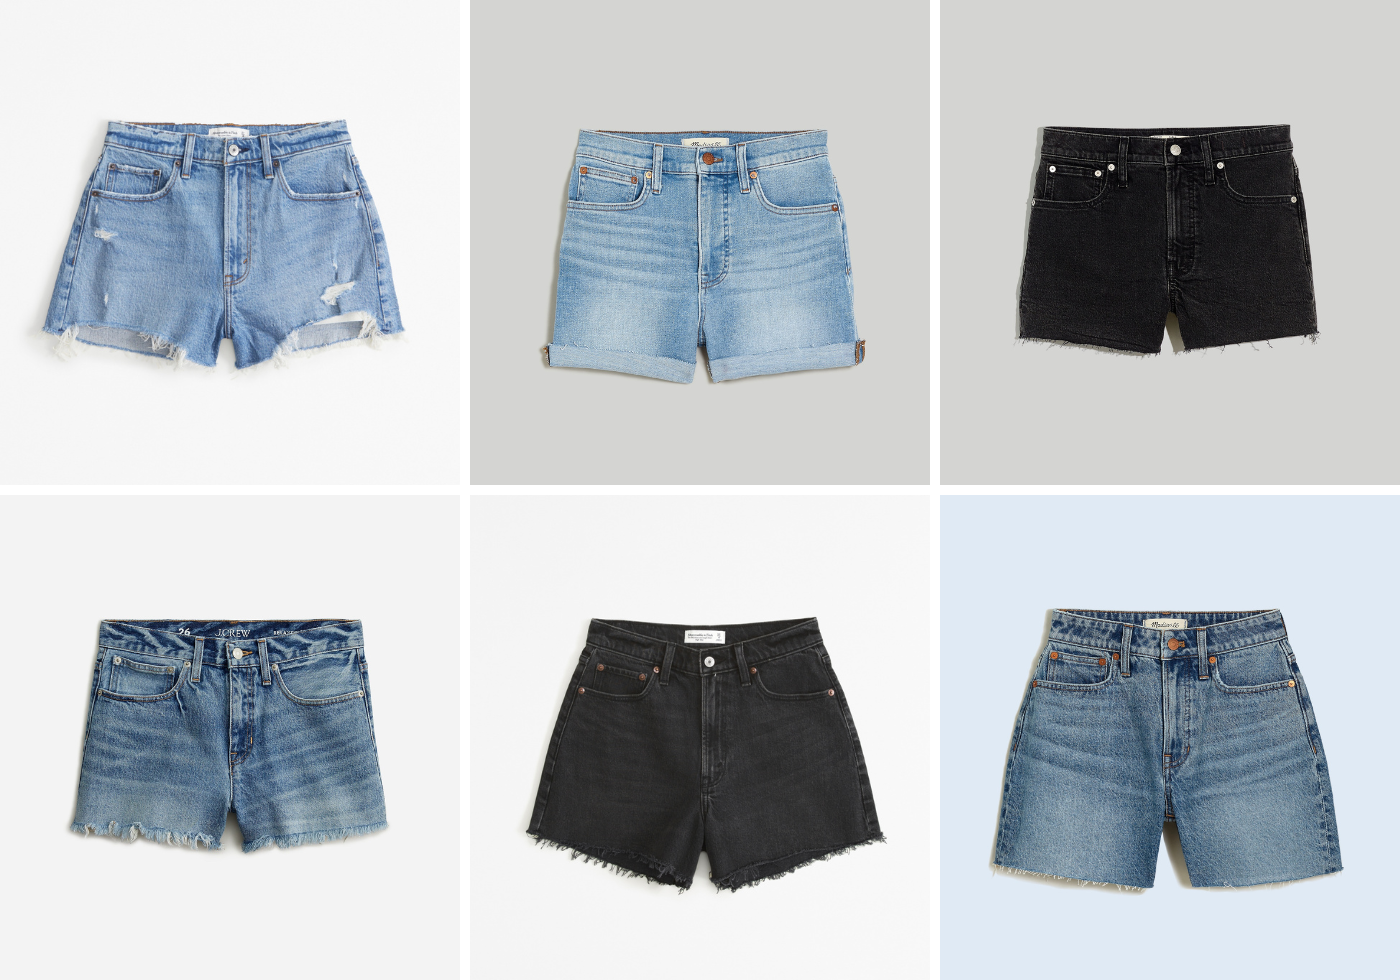 The Best Jean Shorts for Petite Women